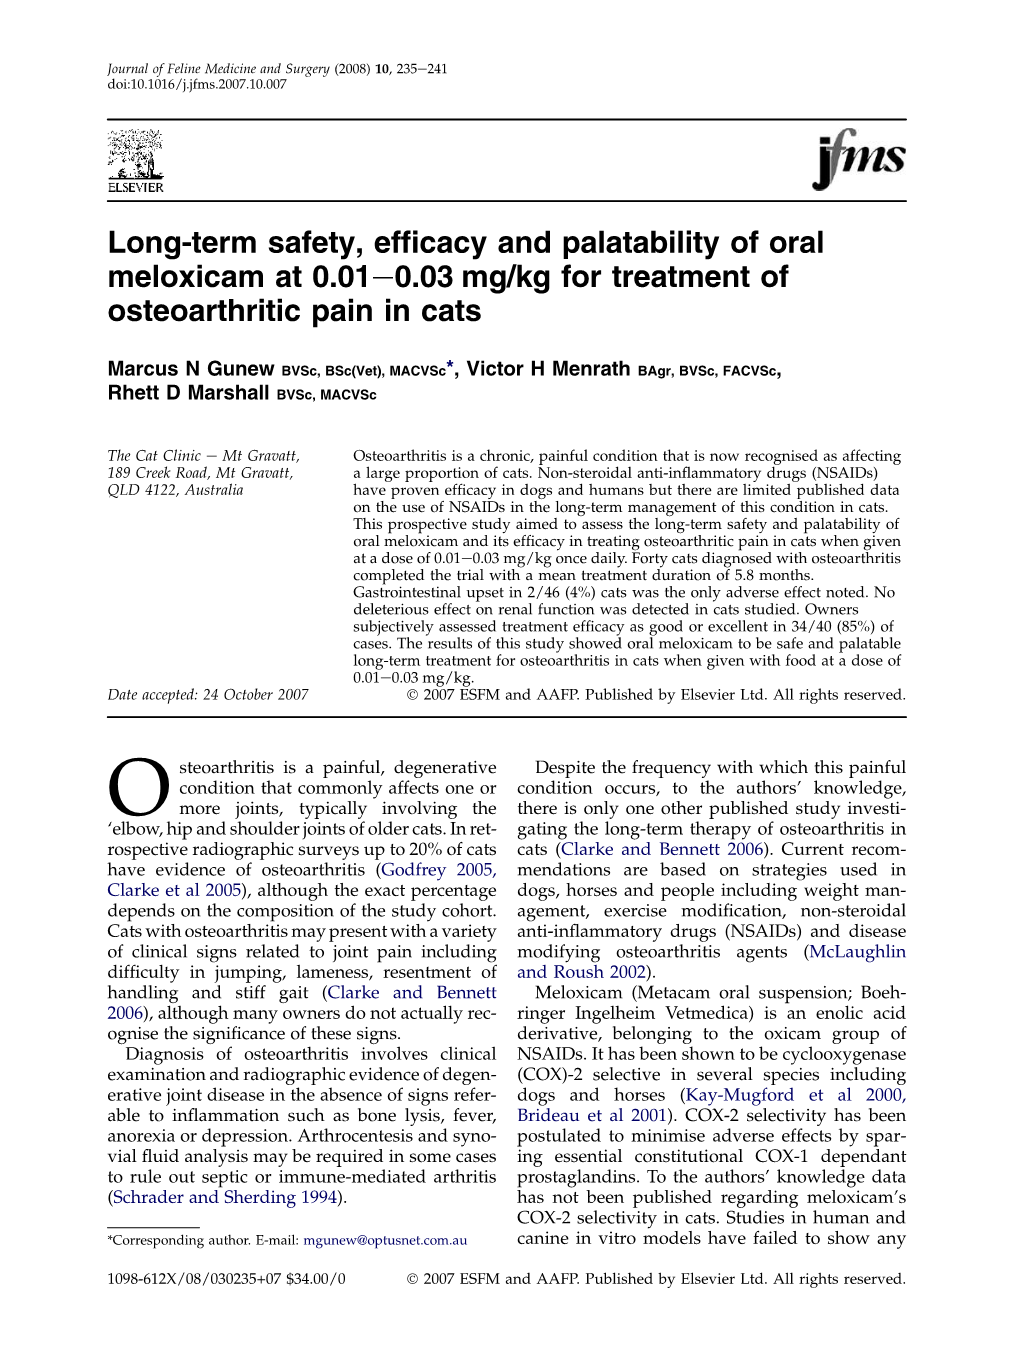 Long-Term Safety, Efficacy and Palatability of Oral Meloxicam At